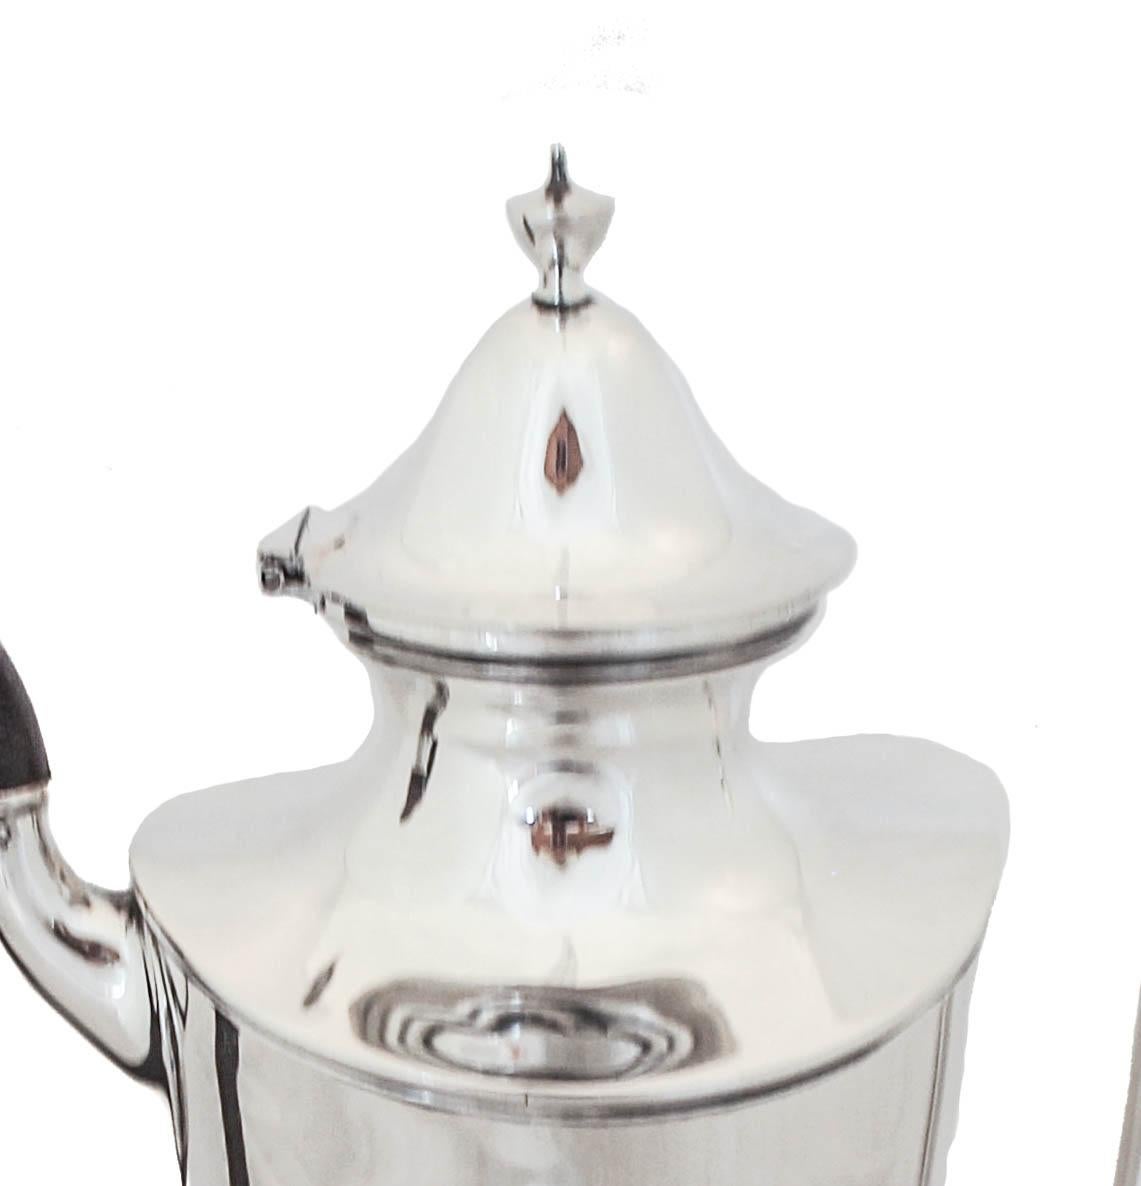 We are delighted to offer you this sterling silver coffee/tea pot by Davis & Galt of Philadelphia. Although this piece is signed Shreve, Crump and Lowe it was in fact manufactured by Davis & Galt; Shreve sold it in their retail shops. An exquisite